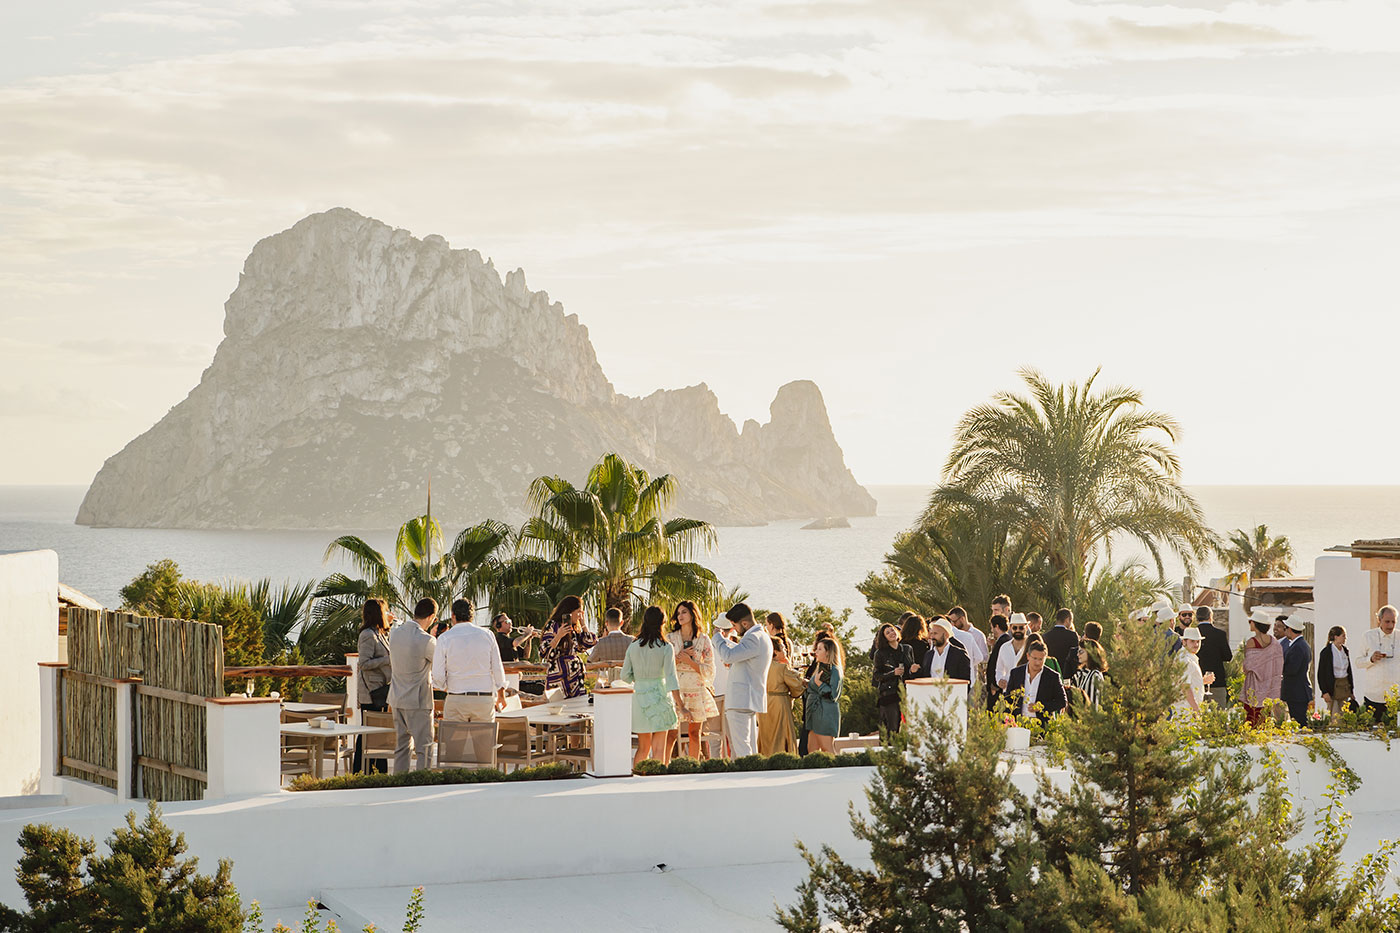 Stunning Rooftop Wedding Venues with Epic Views!